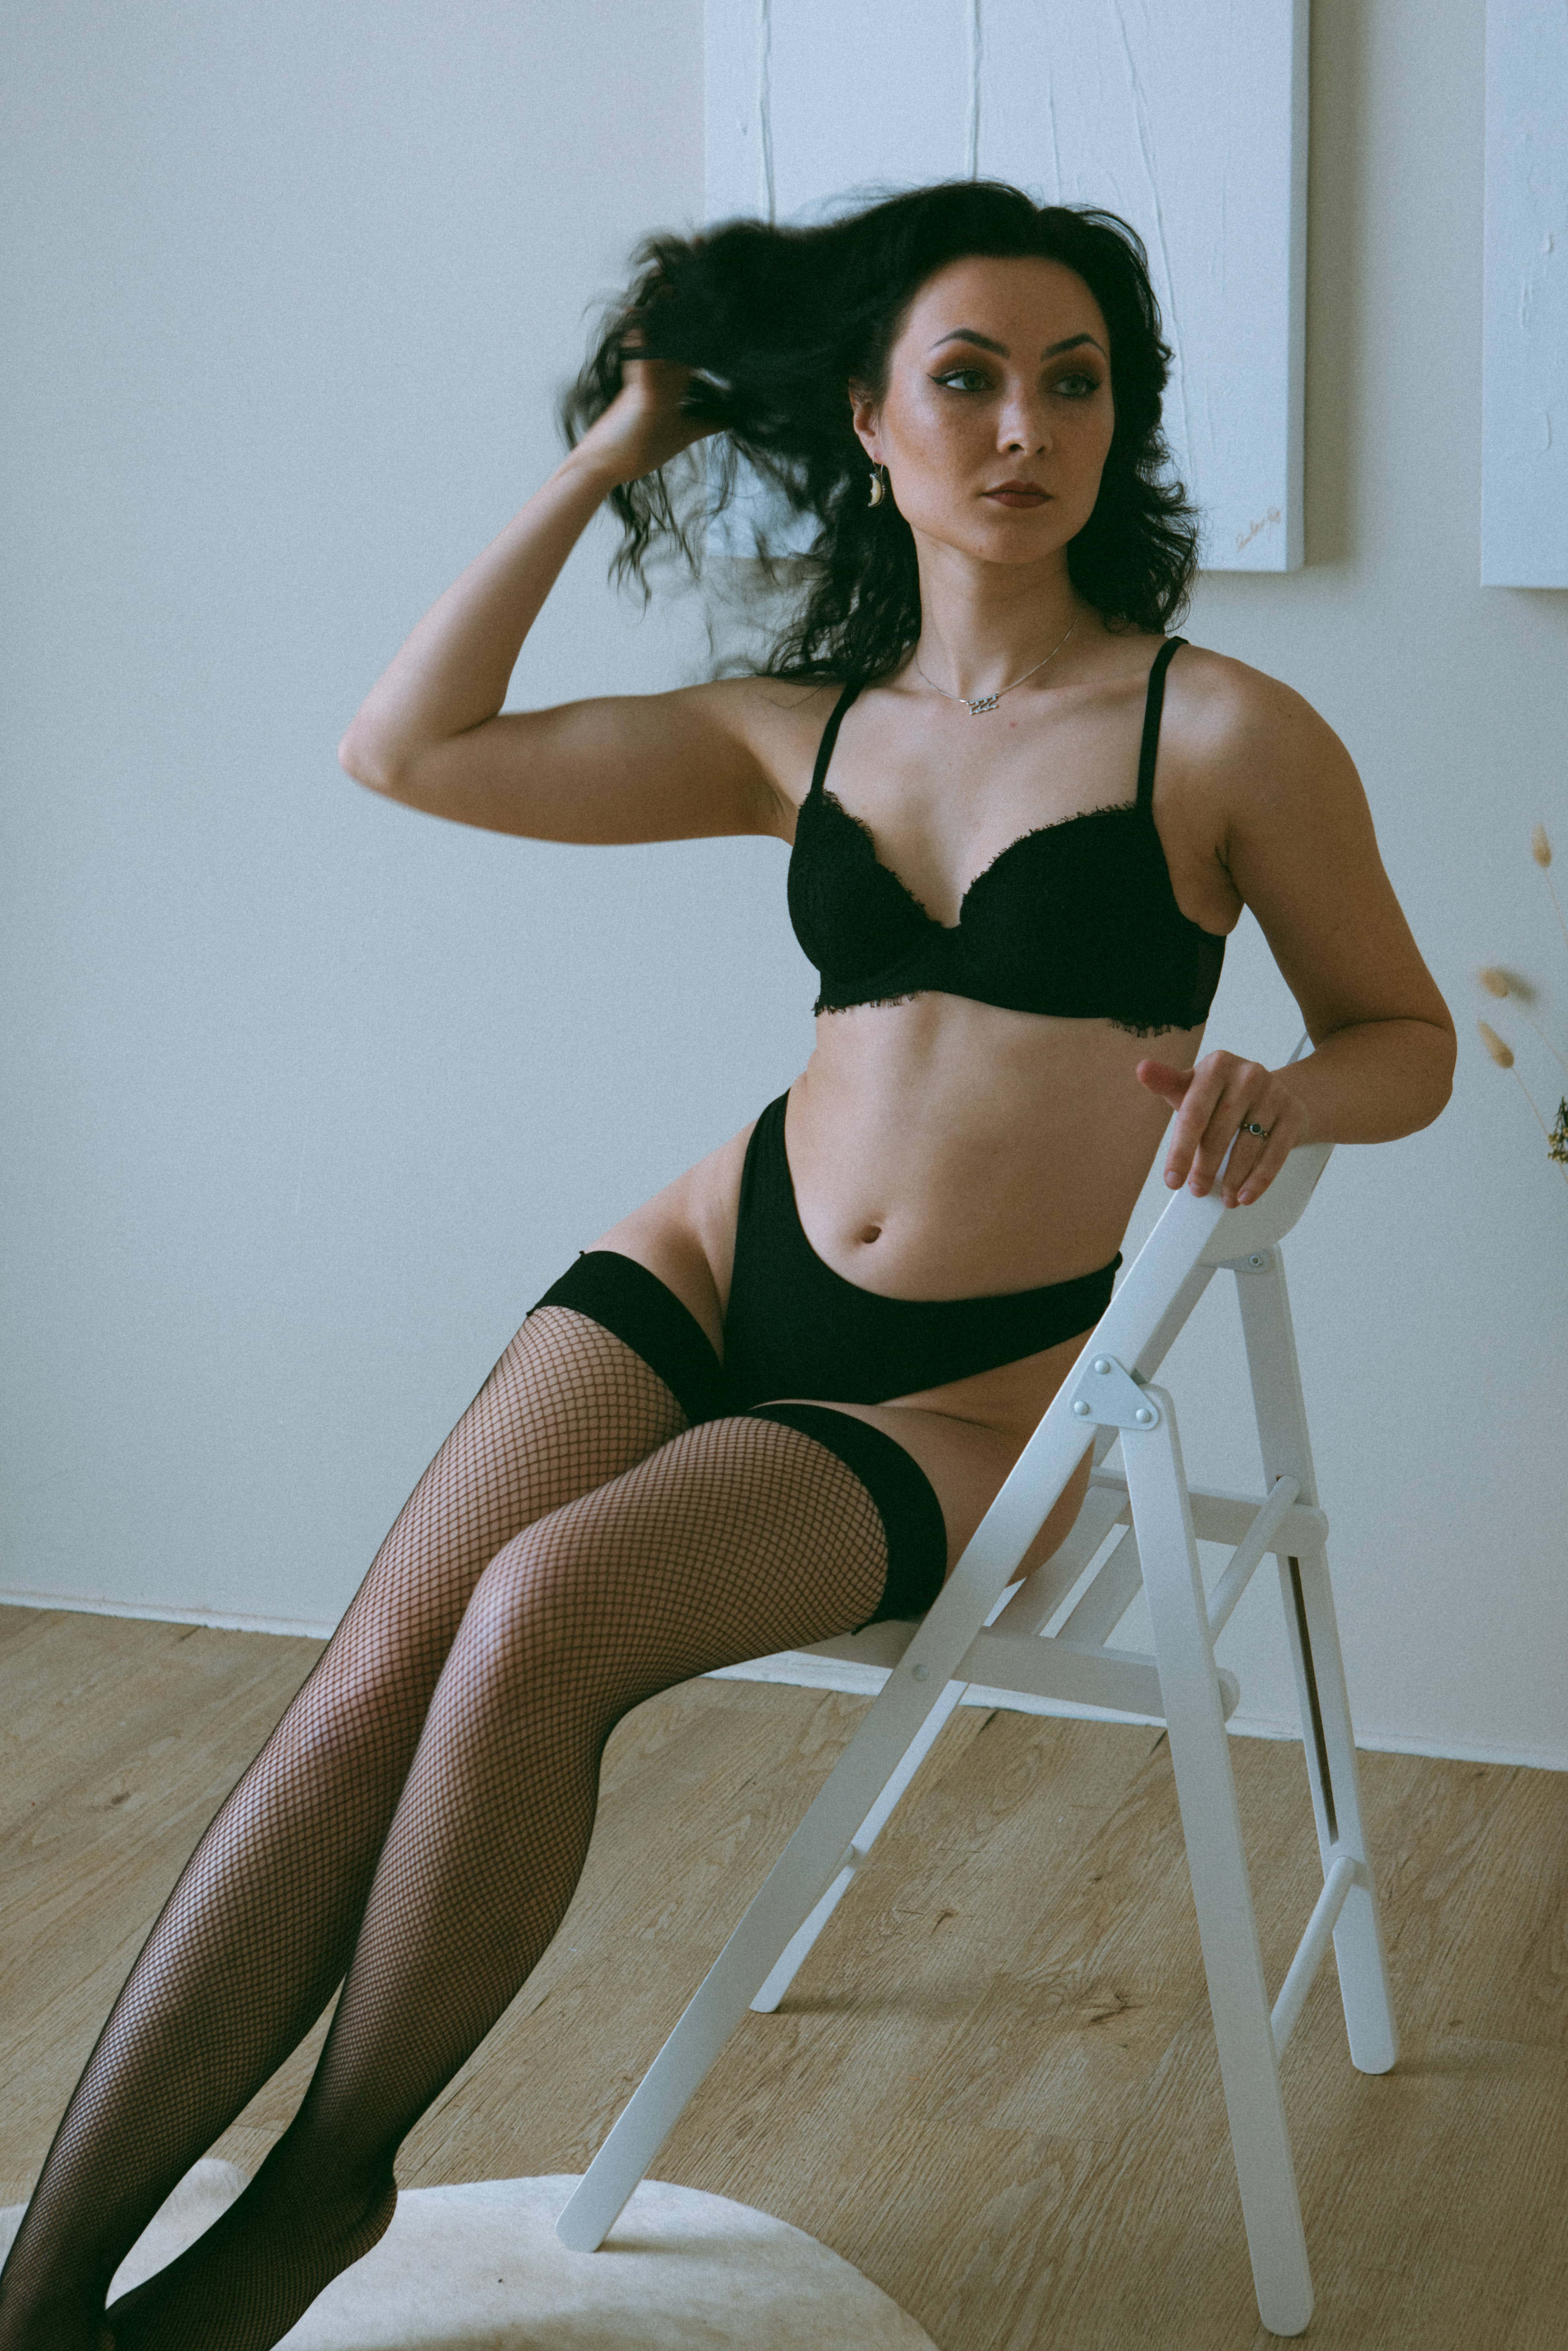 a woman in lingerie sitting on a chair showing what is a boudoir photoshoot